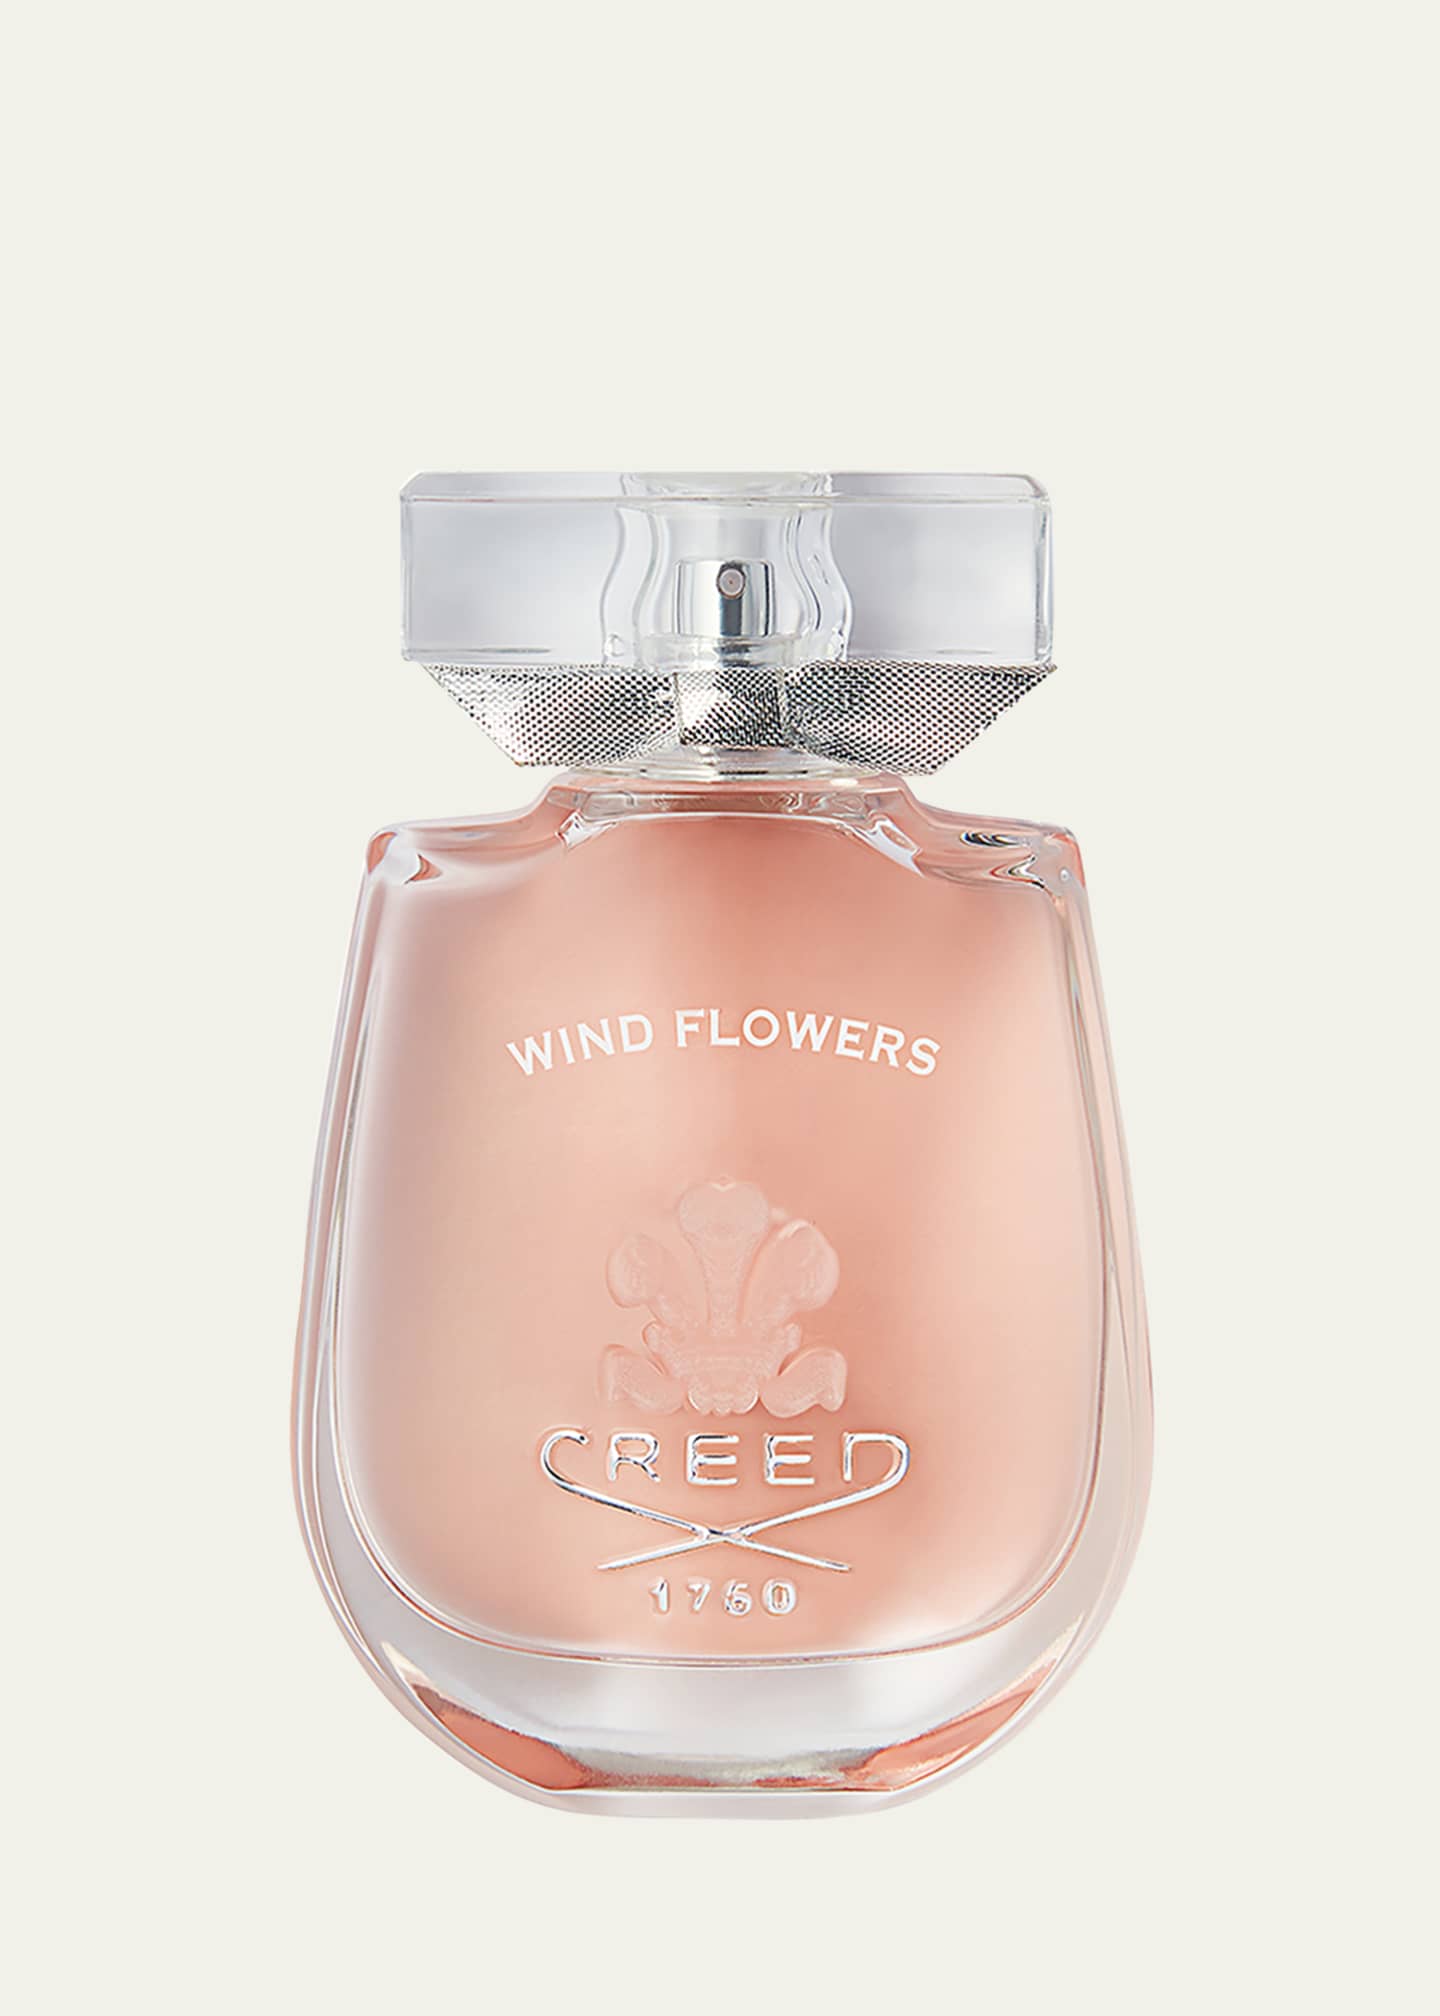 CREED Wind Flower